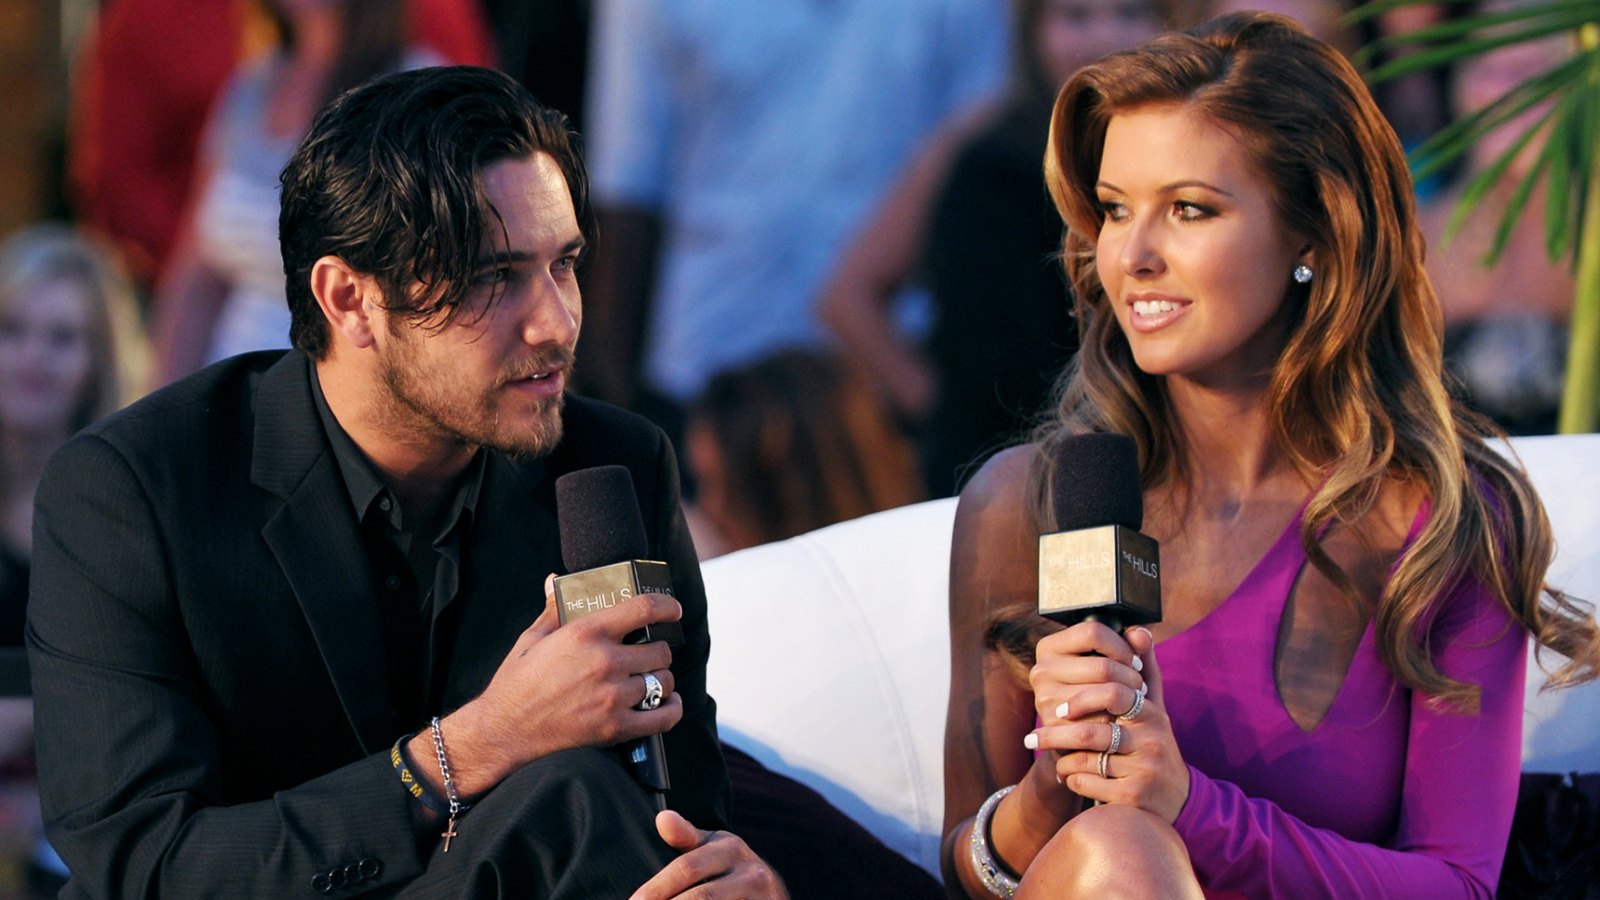 Inside ‘The Hills’ Revival: Audrina Patridge and Justin Bobby Brescia Have Started Filming Together